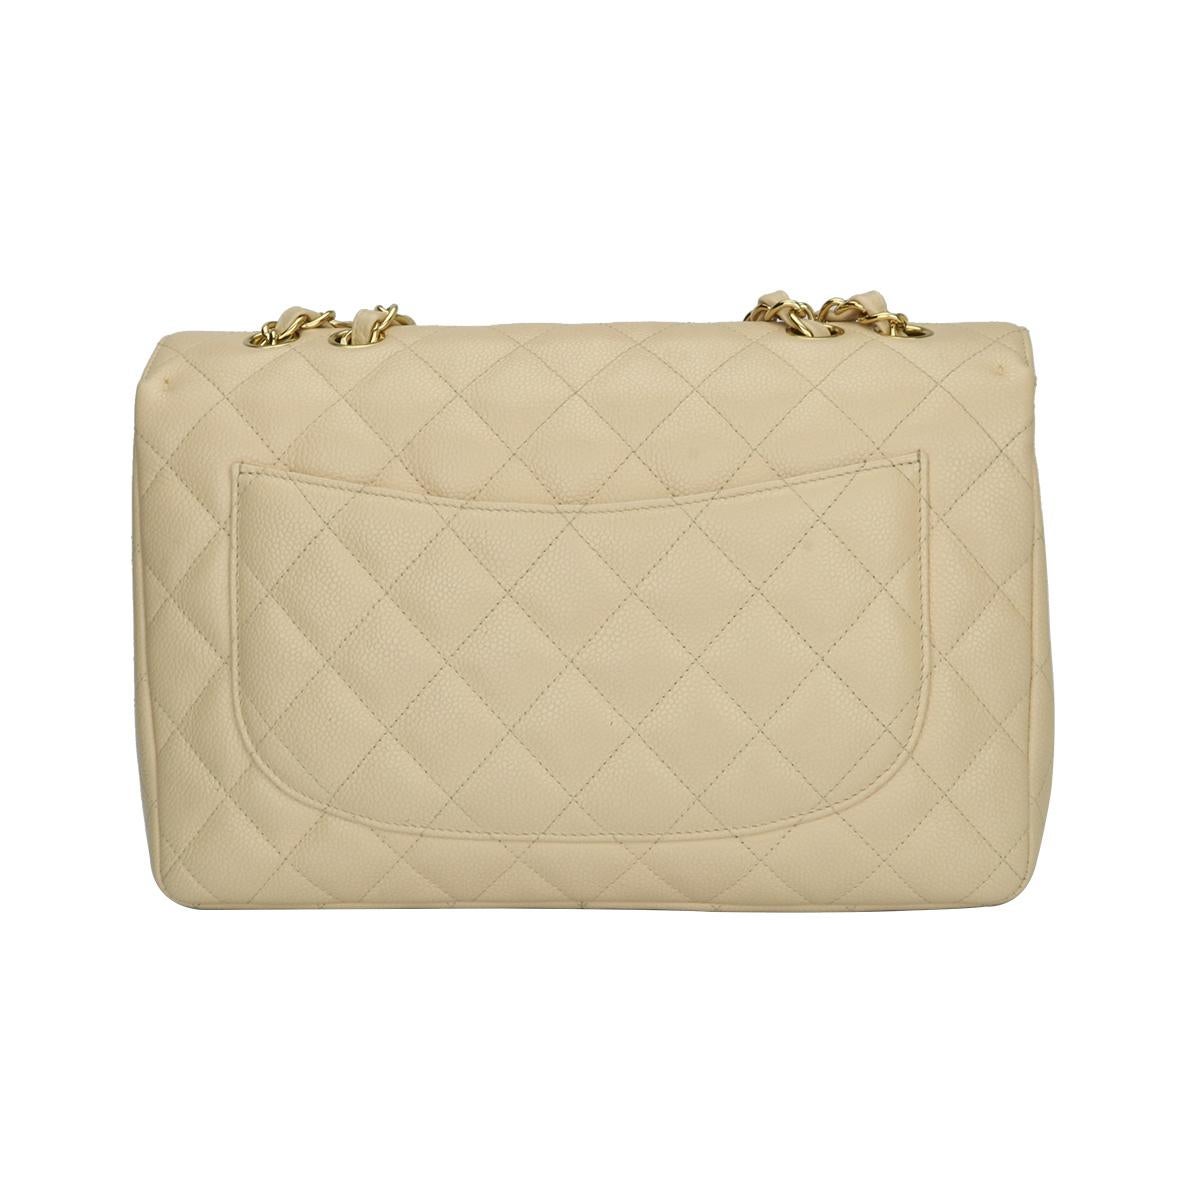 Women's or Men's CHANEL Single Flap Jumbo Bag Beige Clair Caviar with Gold Hardware 2009